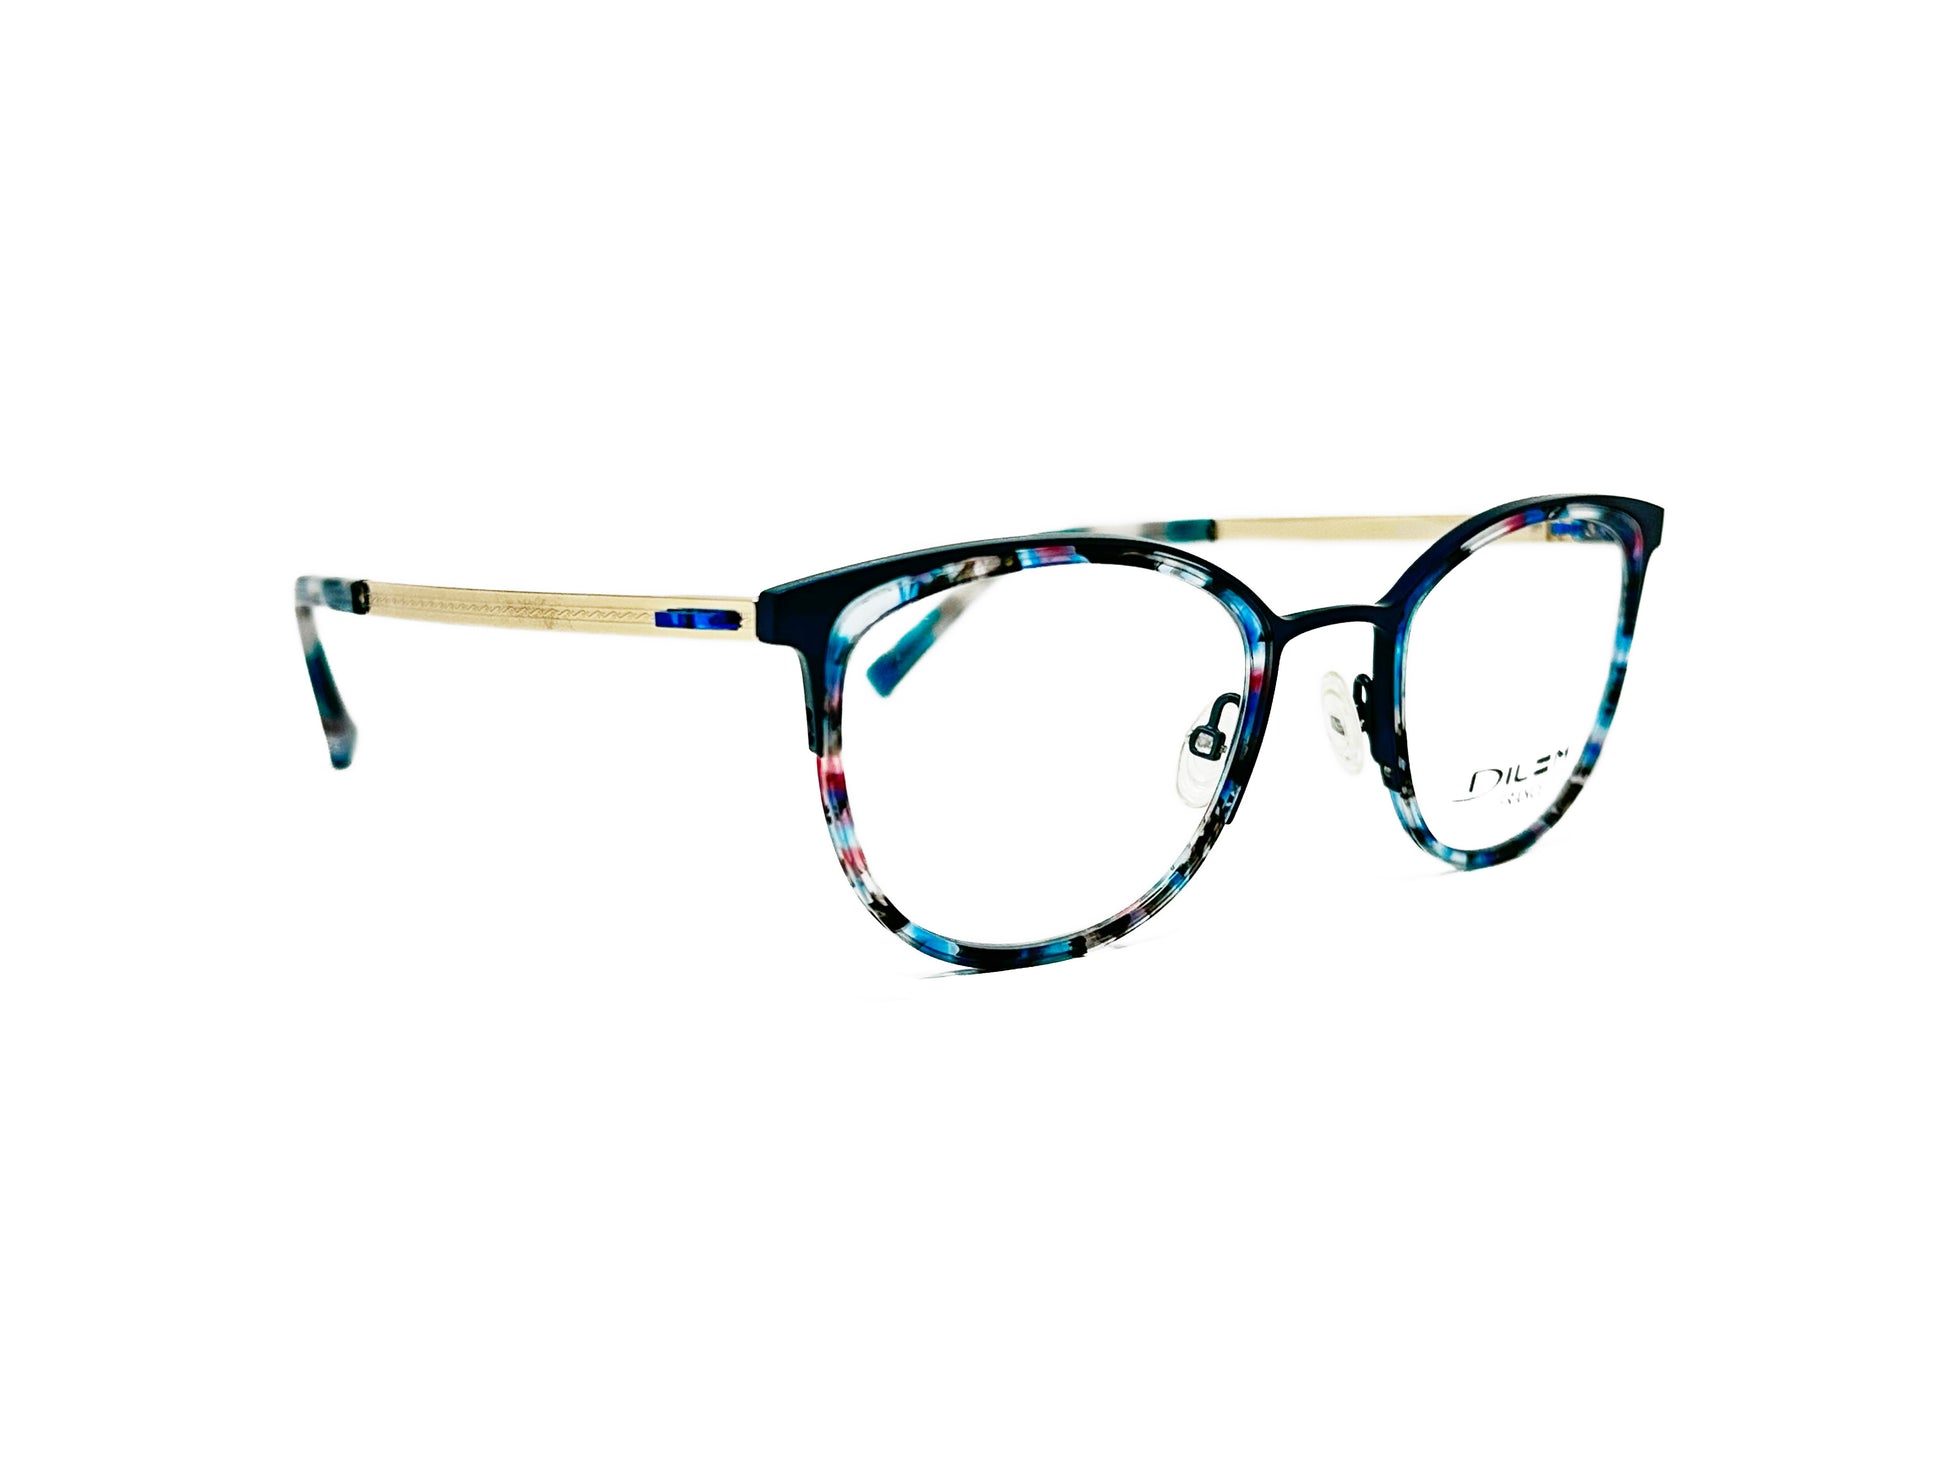 Dilem round metal frame with wing tips and acetate insert lining. Model: ZU108. Color: 2JA02 - Multi-color blue acetate insert with black metal front and gold metal temples. Side view.